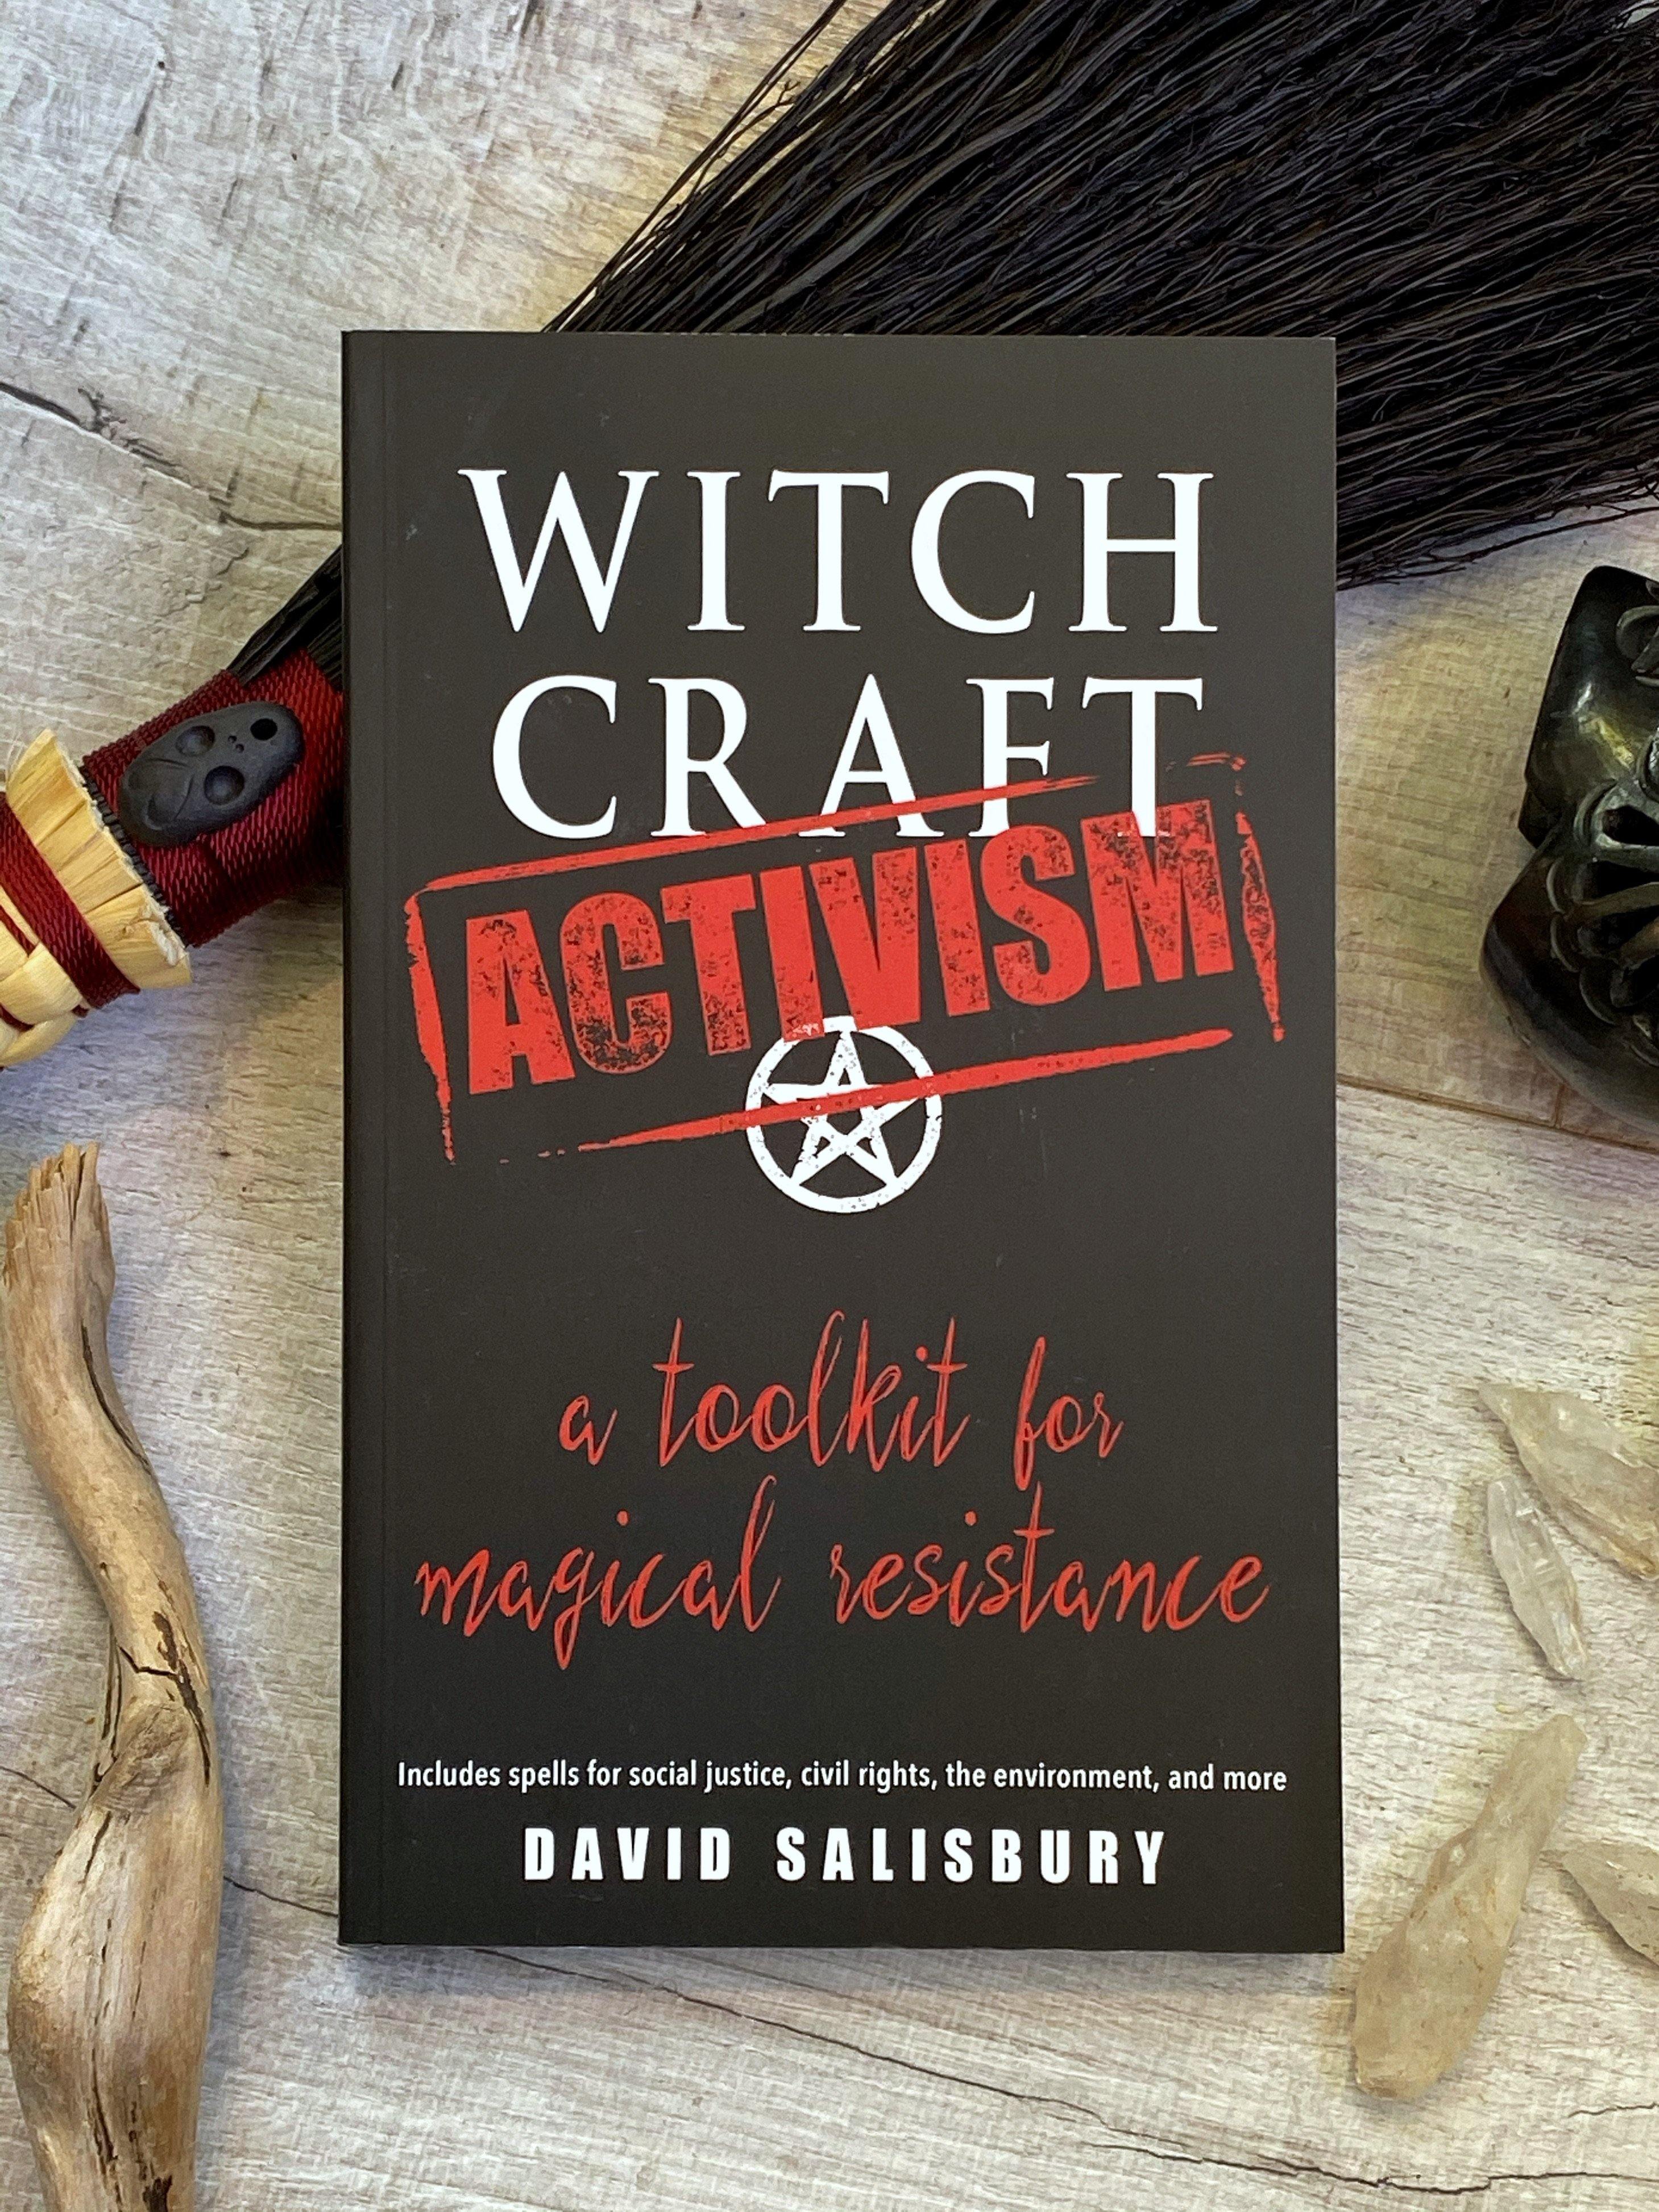 Witchcraft Activism: A Toolkit for Magical Resistance (Includes Spells for Social Justice, Civil Rights, the Environment, and More) - Keven Craft Rituals